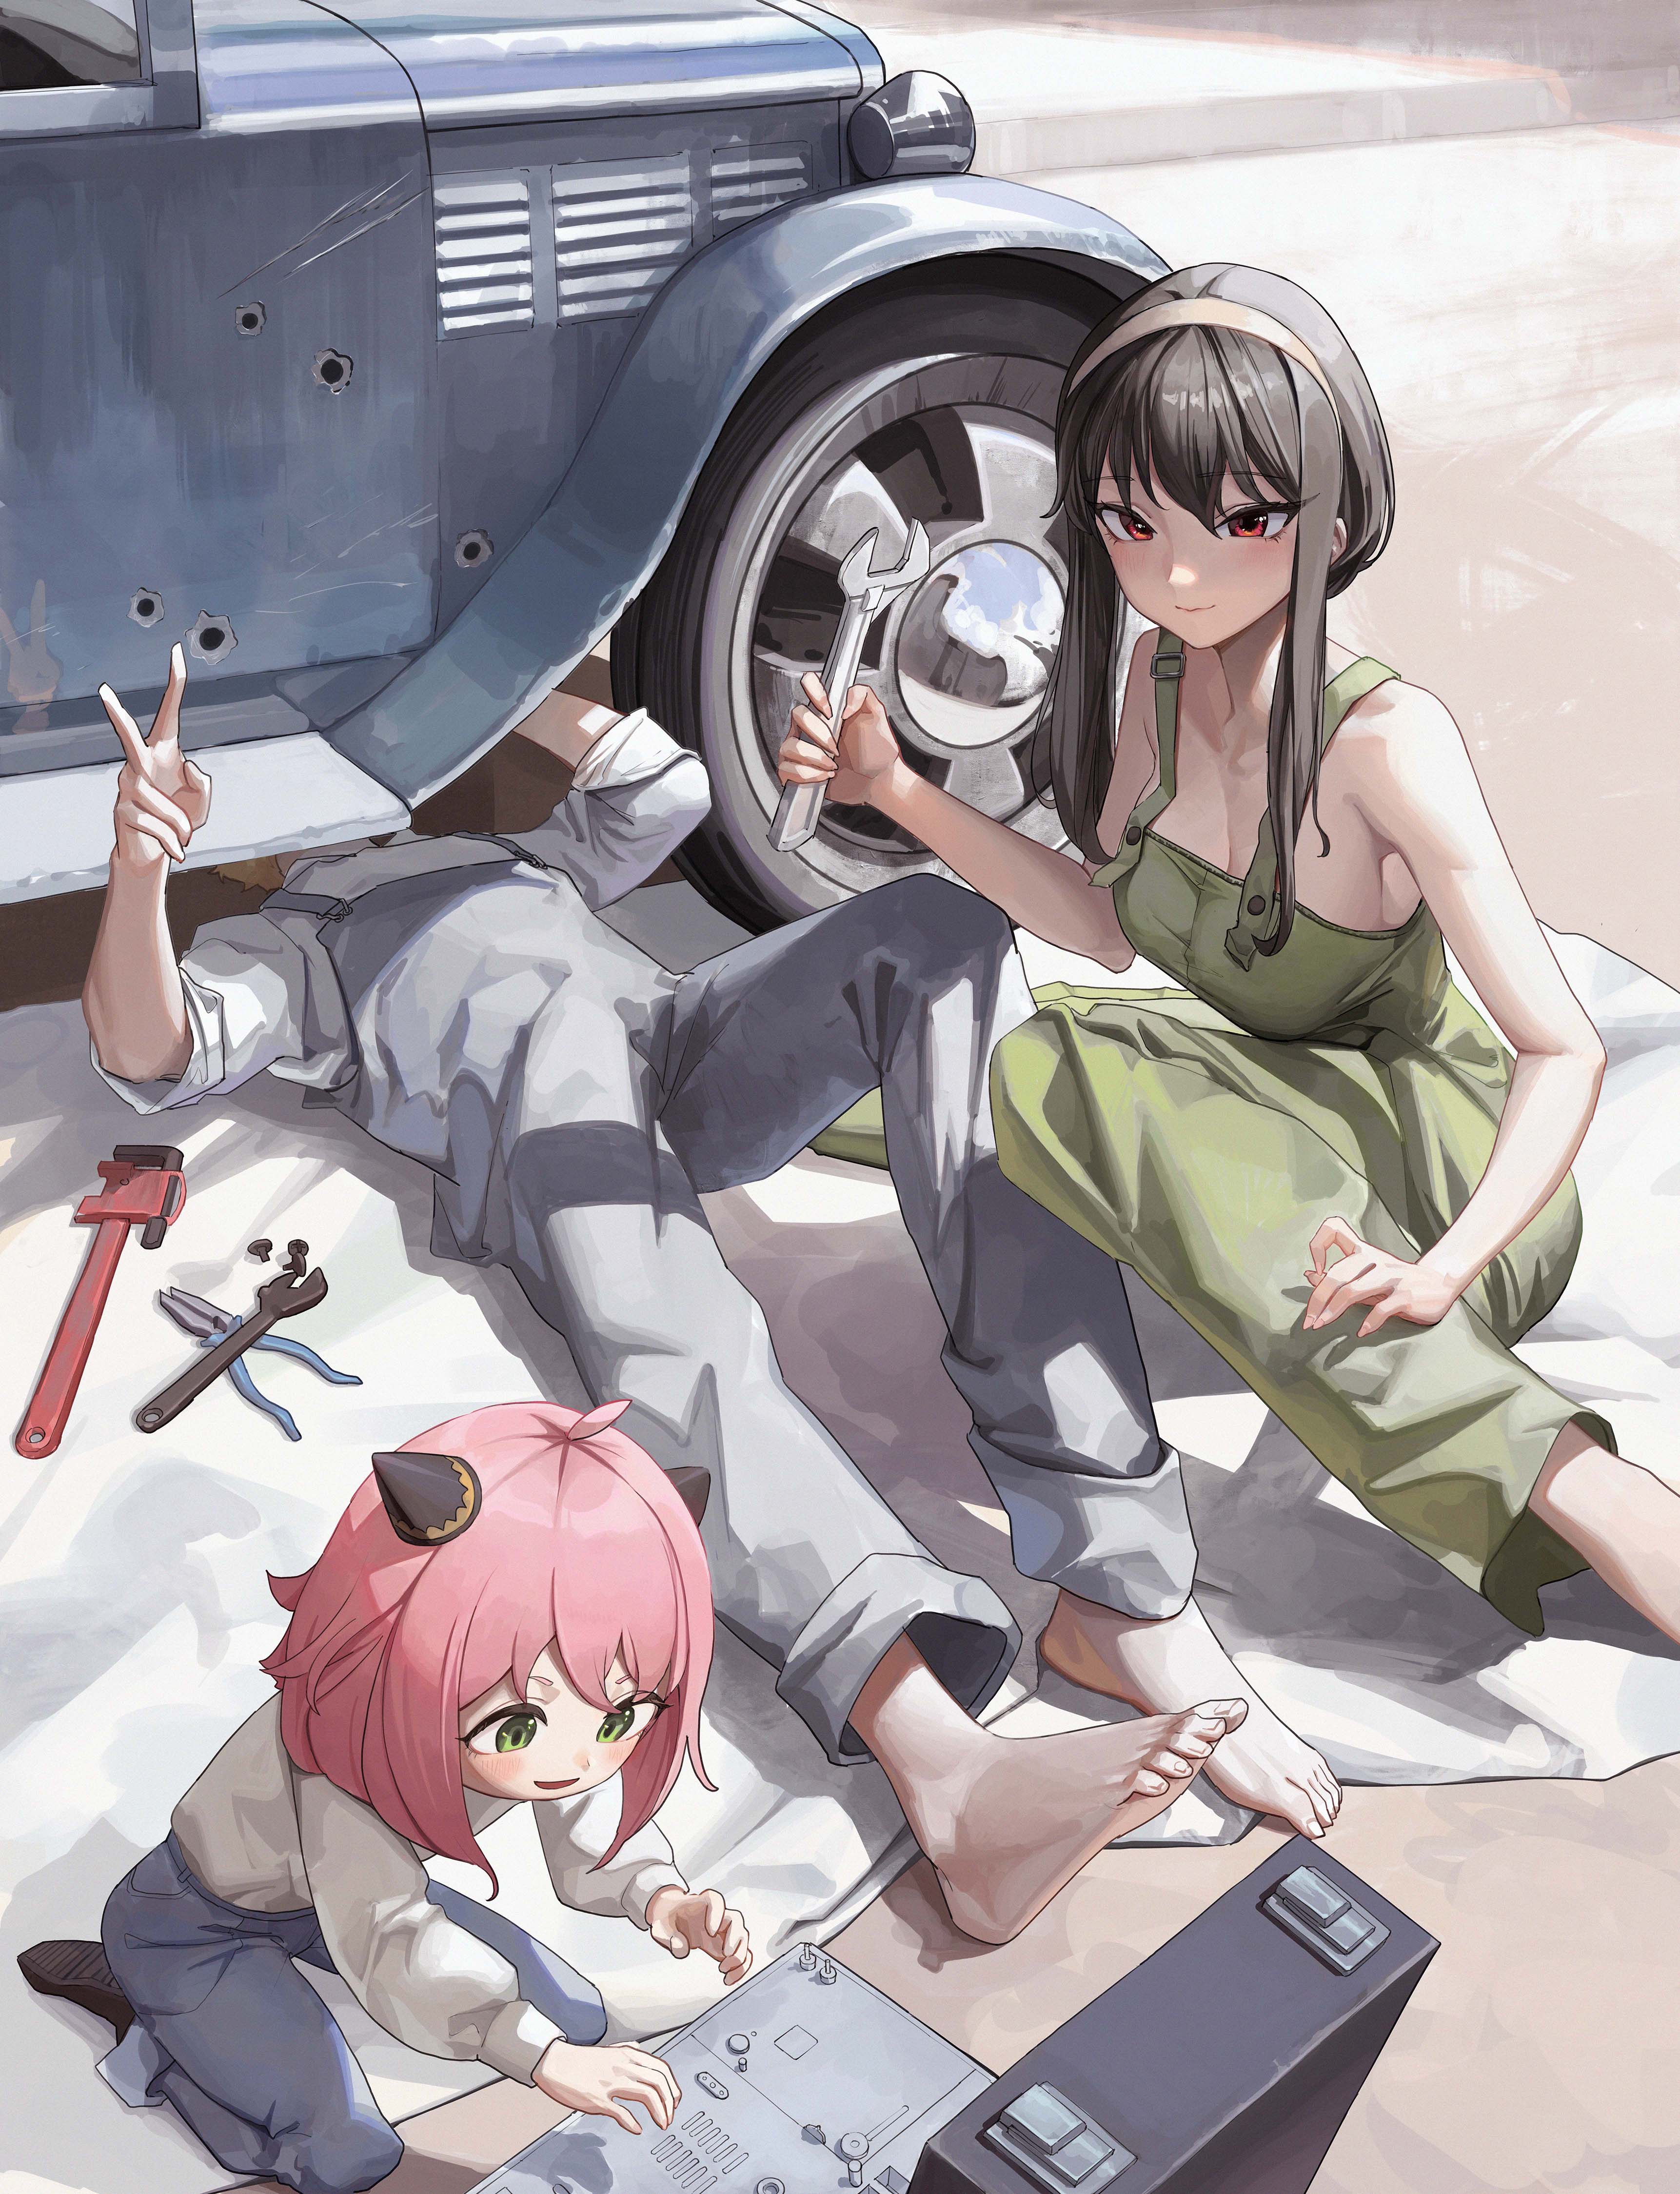 Spy X Family Anime Mechanics Wrench Bullet Holes Victory Sign Car Repair Loid Forger Anya Forger Yor 3445x4499